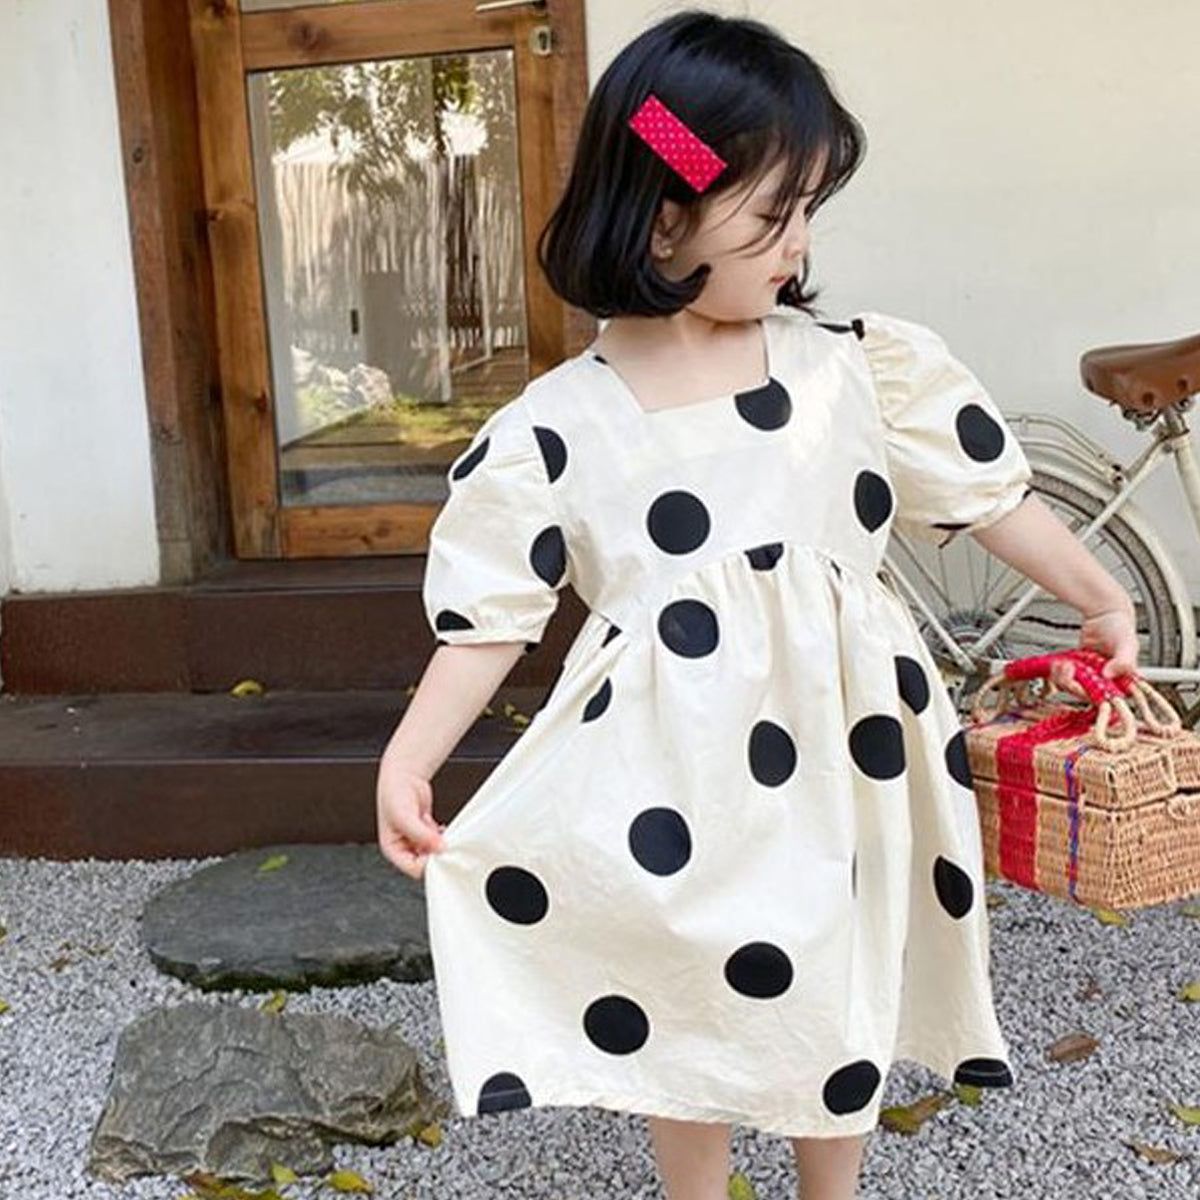 Organic Cotton Children's Long Sleeve Jersey Knit Dress, Multi-color Polka  Dot, 10-12 Years Old, GOTS Certified, Girls, Kids Clothes - Etsy